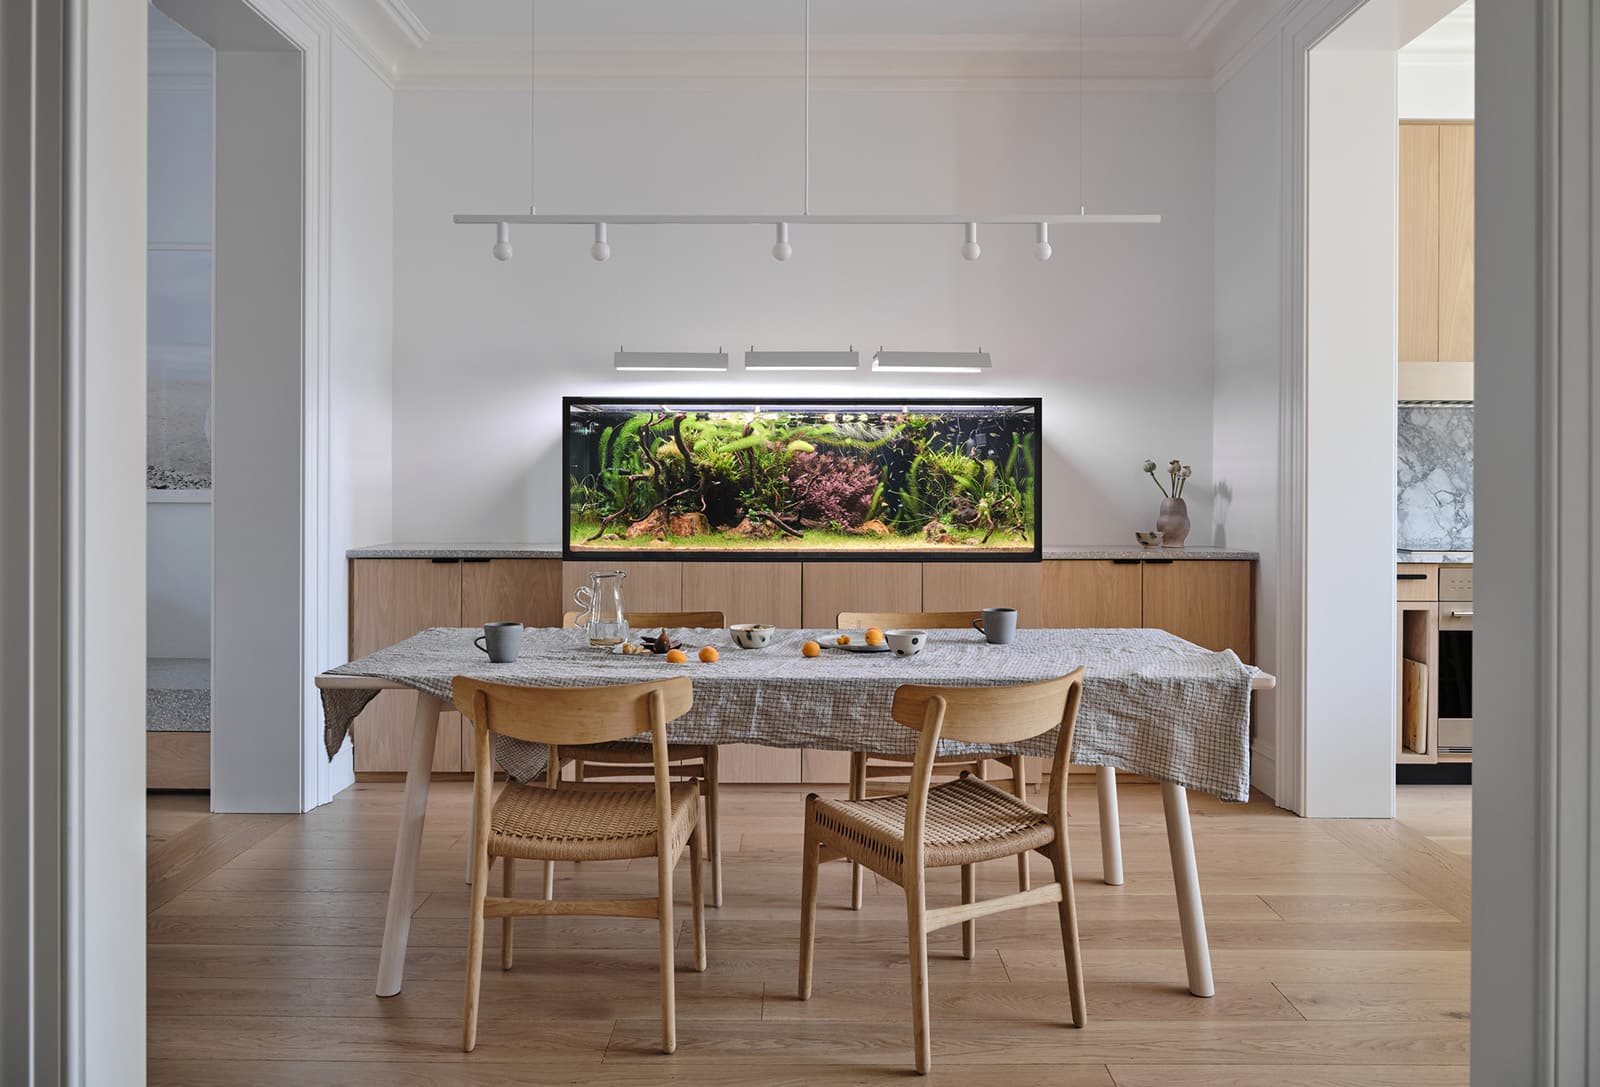 DINING ROOM WITH FISH TANK